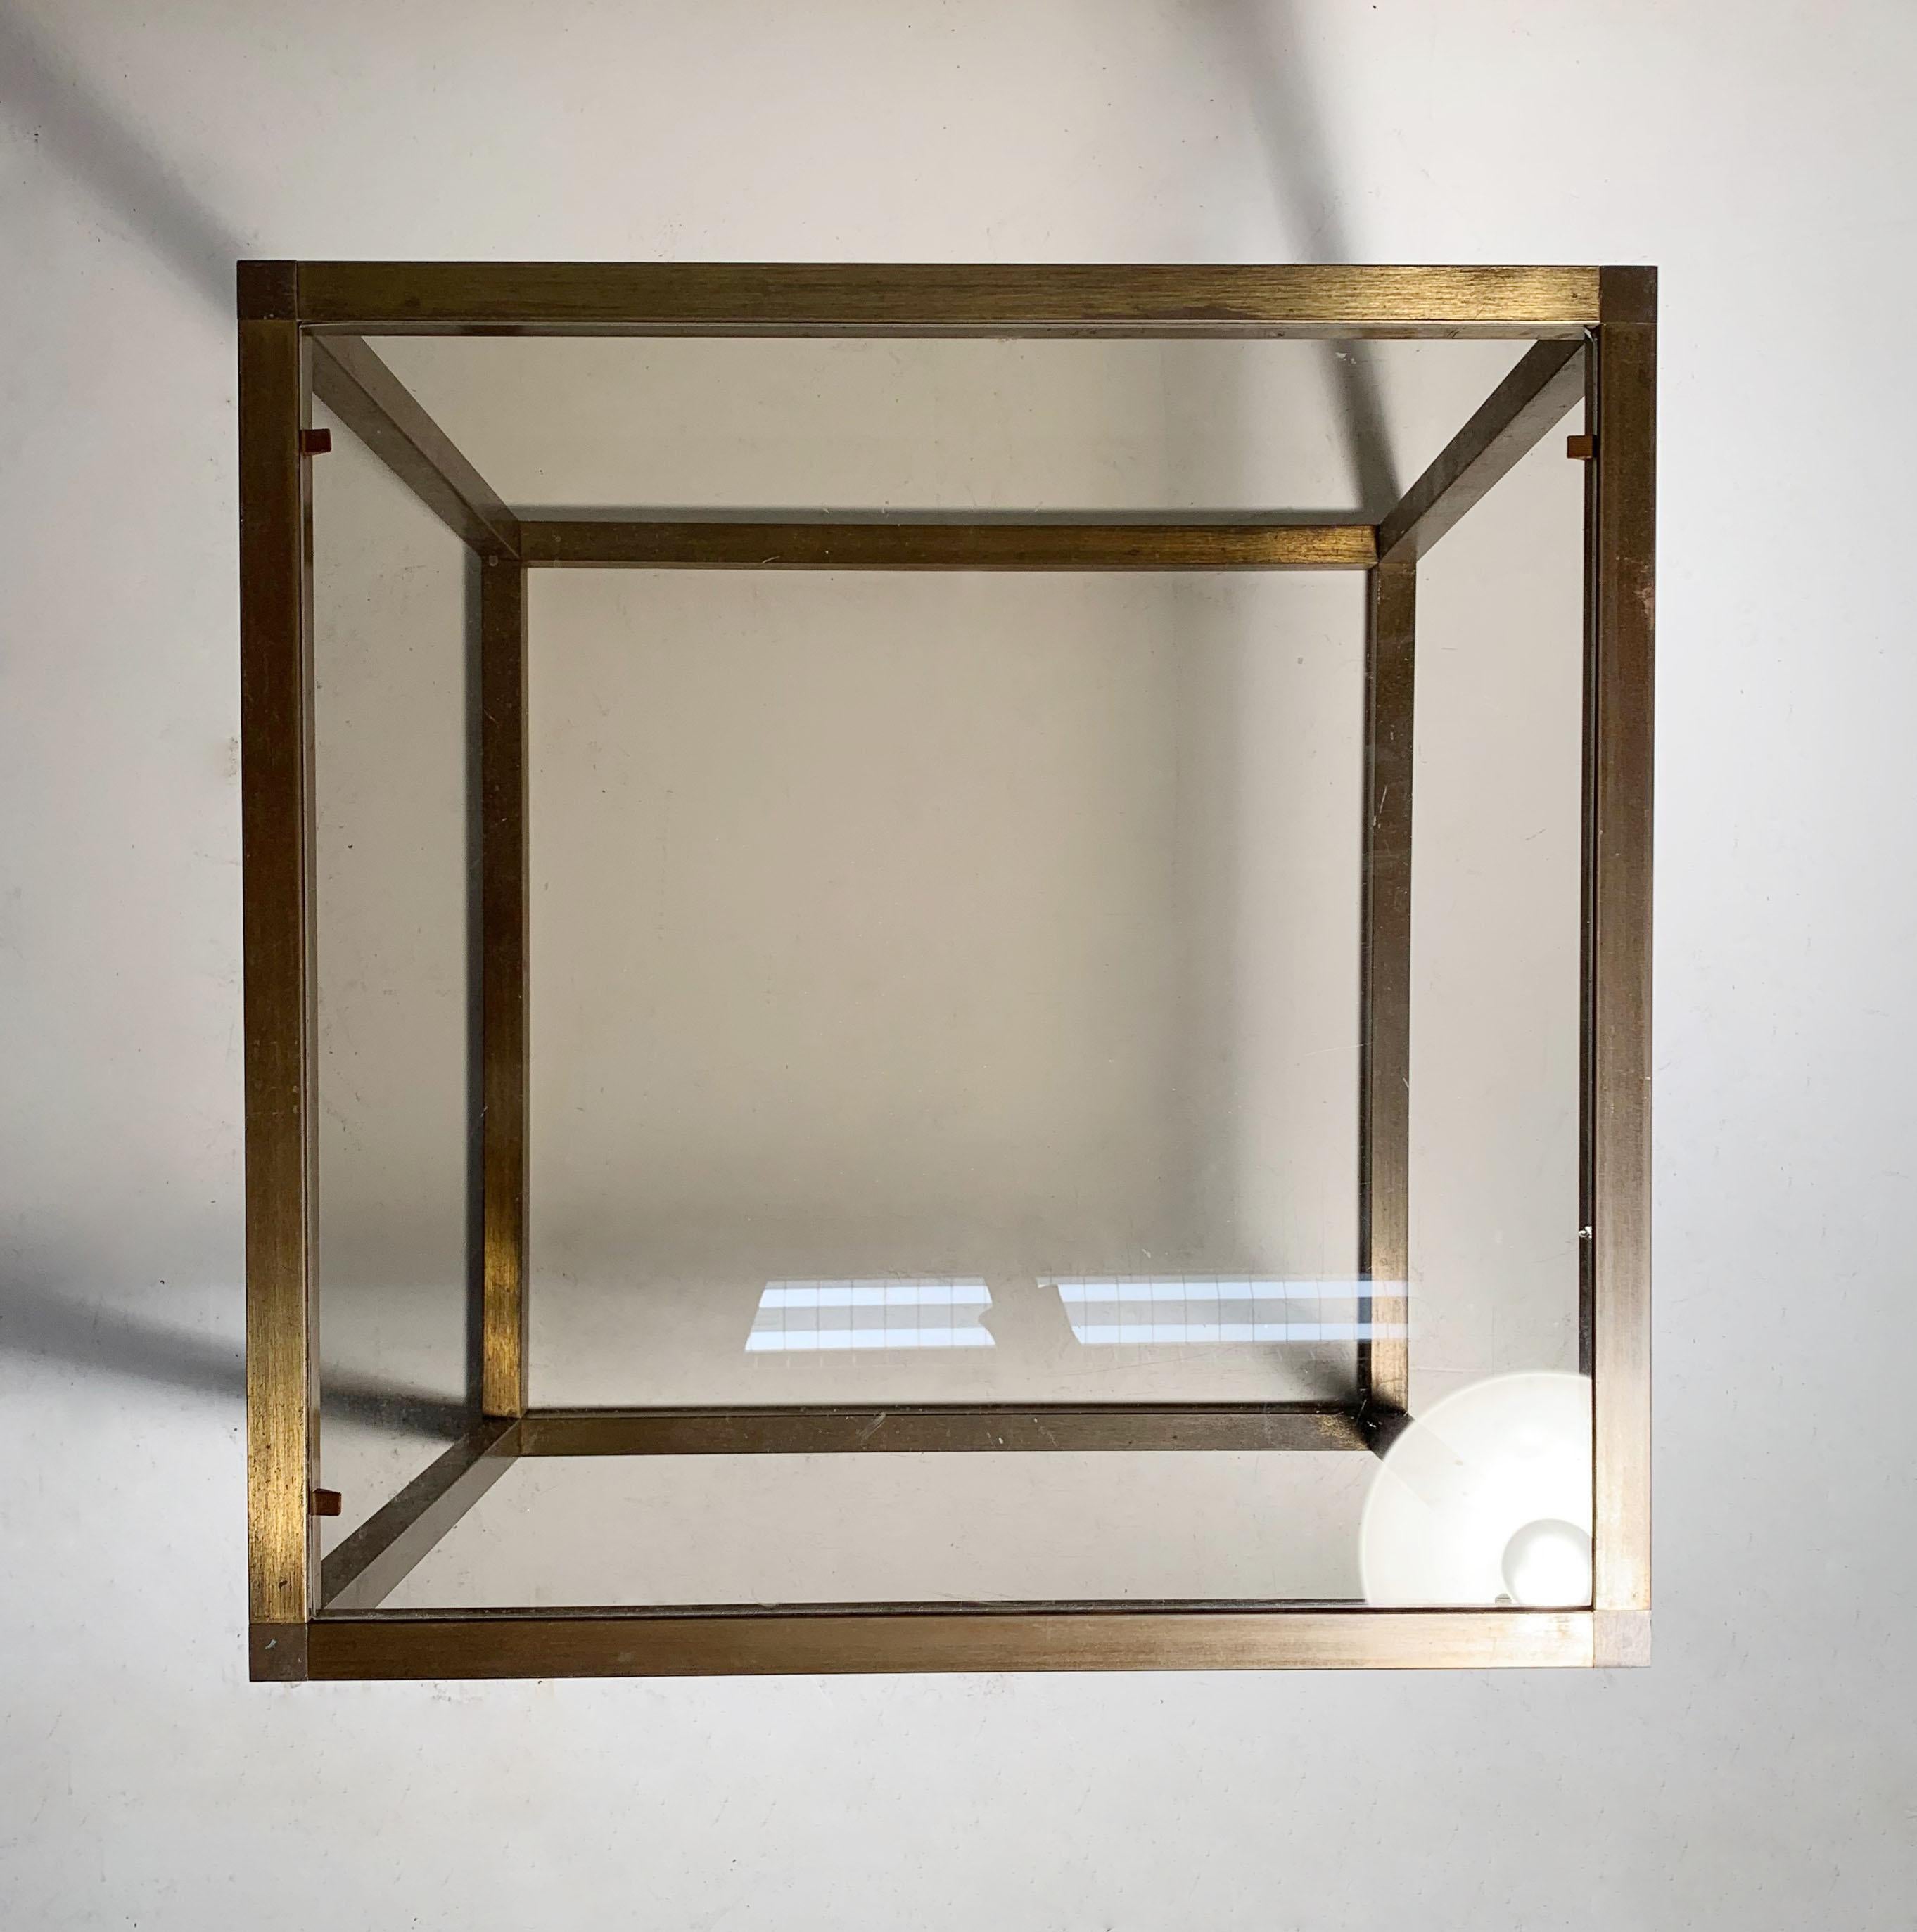 Italian 1960s-1970s bronzed extrusion cube table with tinted glass. In the manner of Milo Baughman


Glass has some damage by one corner. Wear/patina to the finish on the metal, but overall nice vintage condition. More pics available.